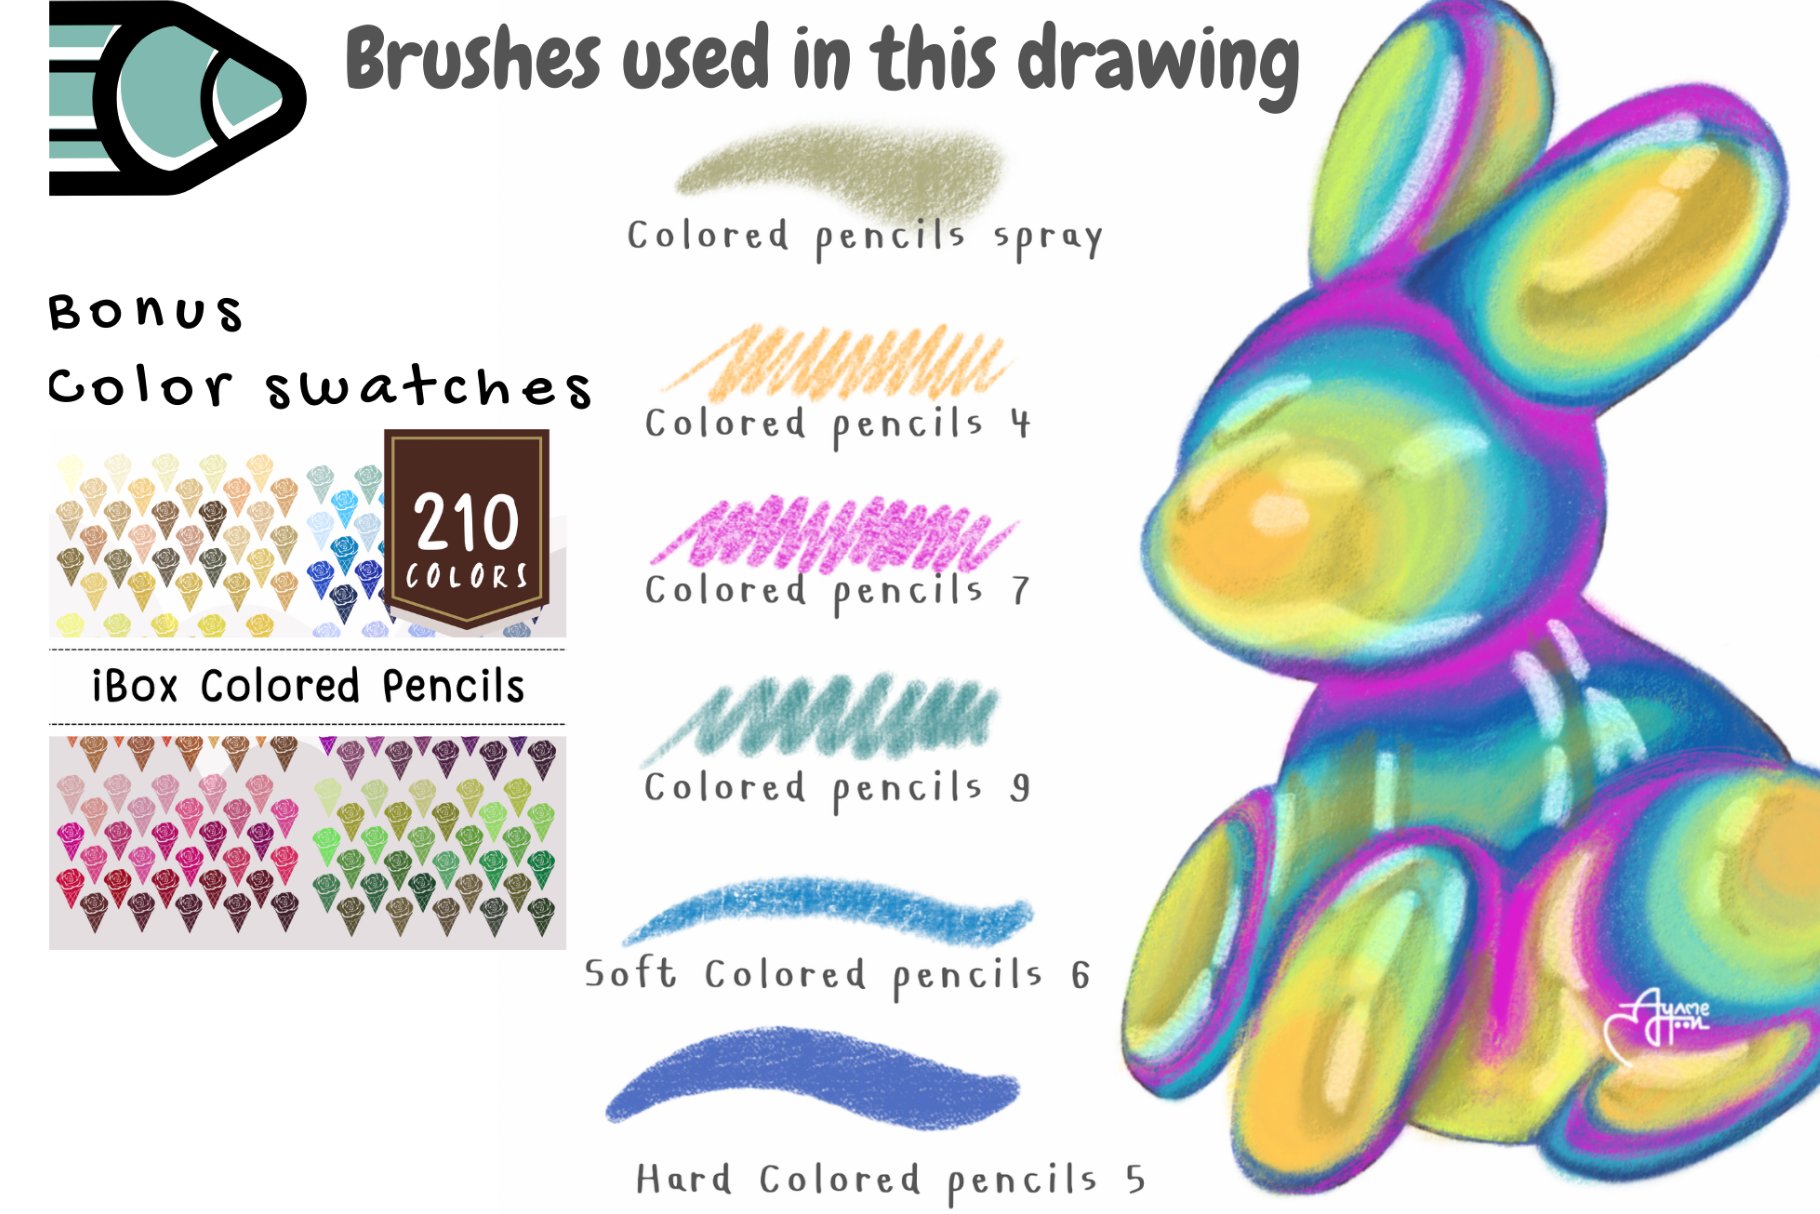 33 Colored pencils procreate brushes preview image.